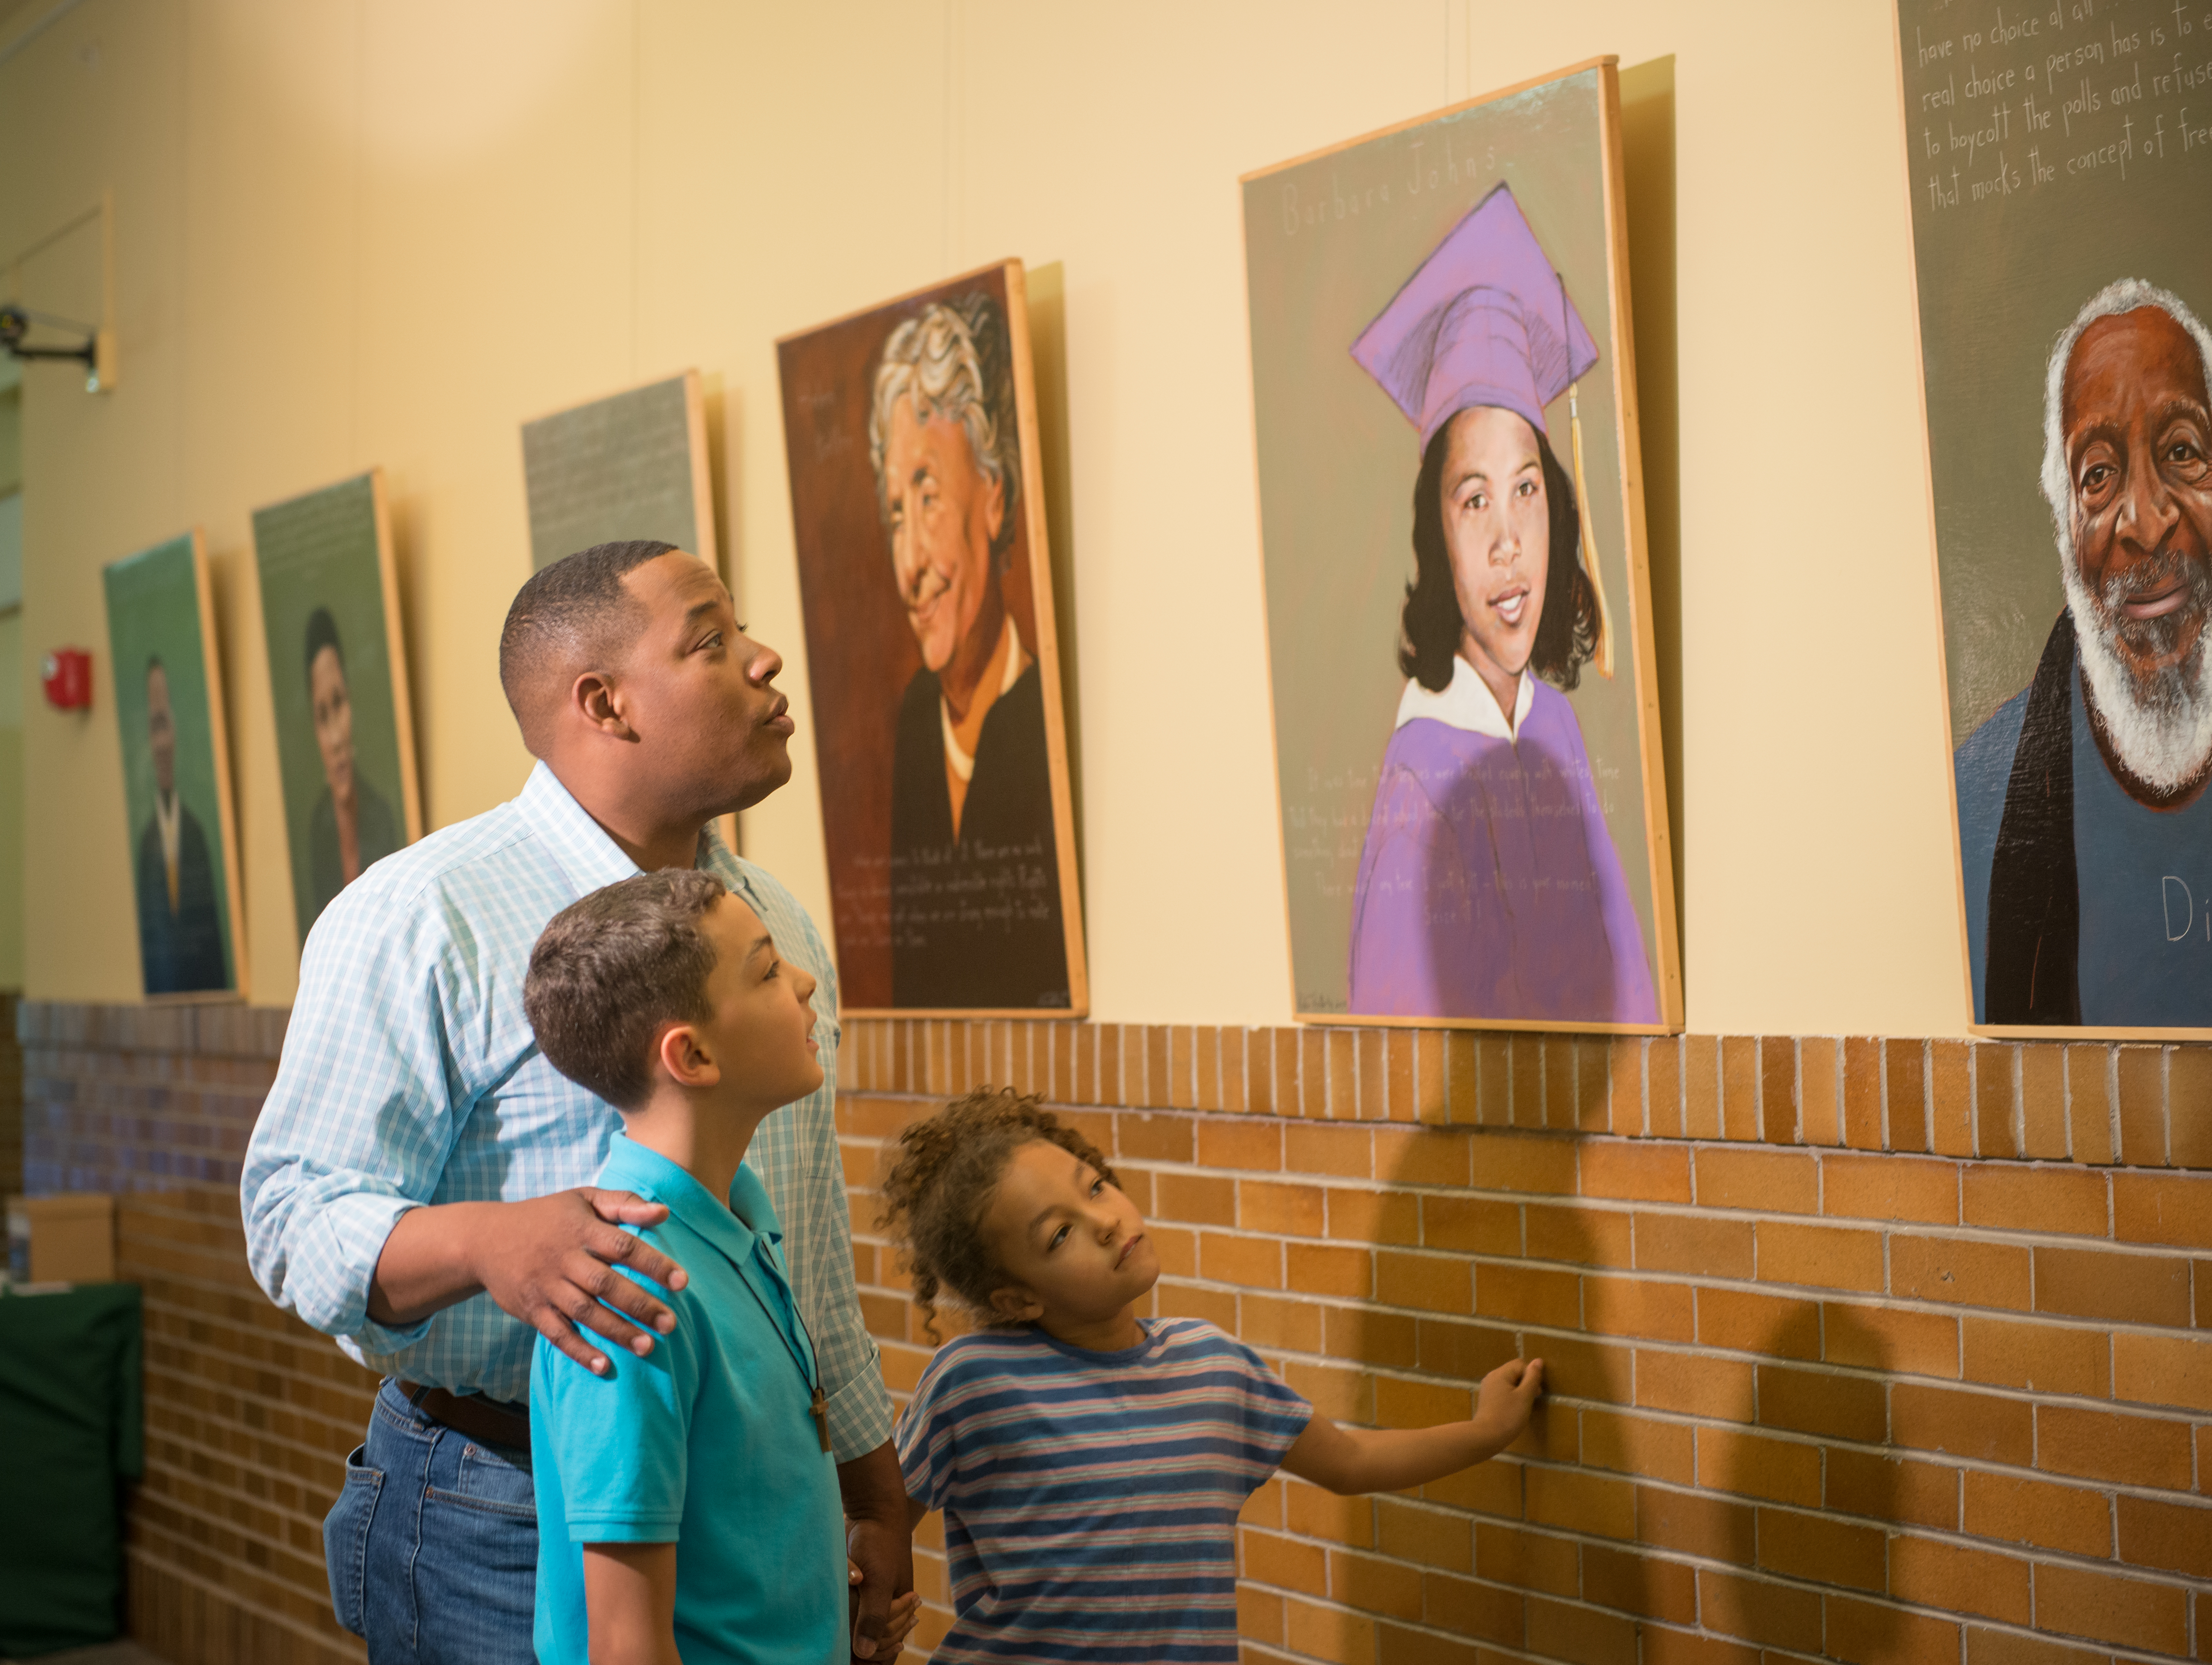 A father and two children admiring portraits at the Brown V Board Museum.